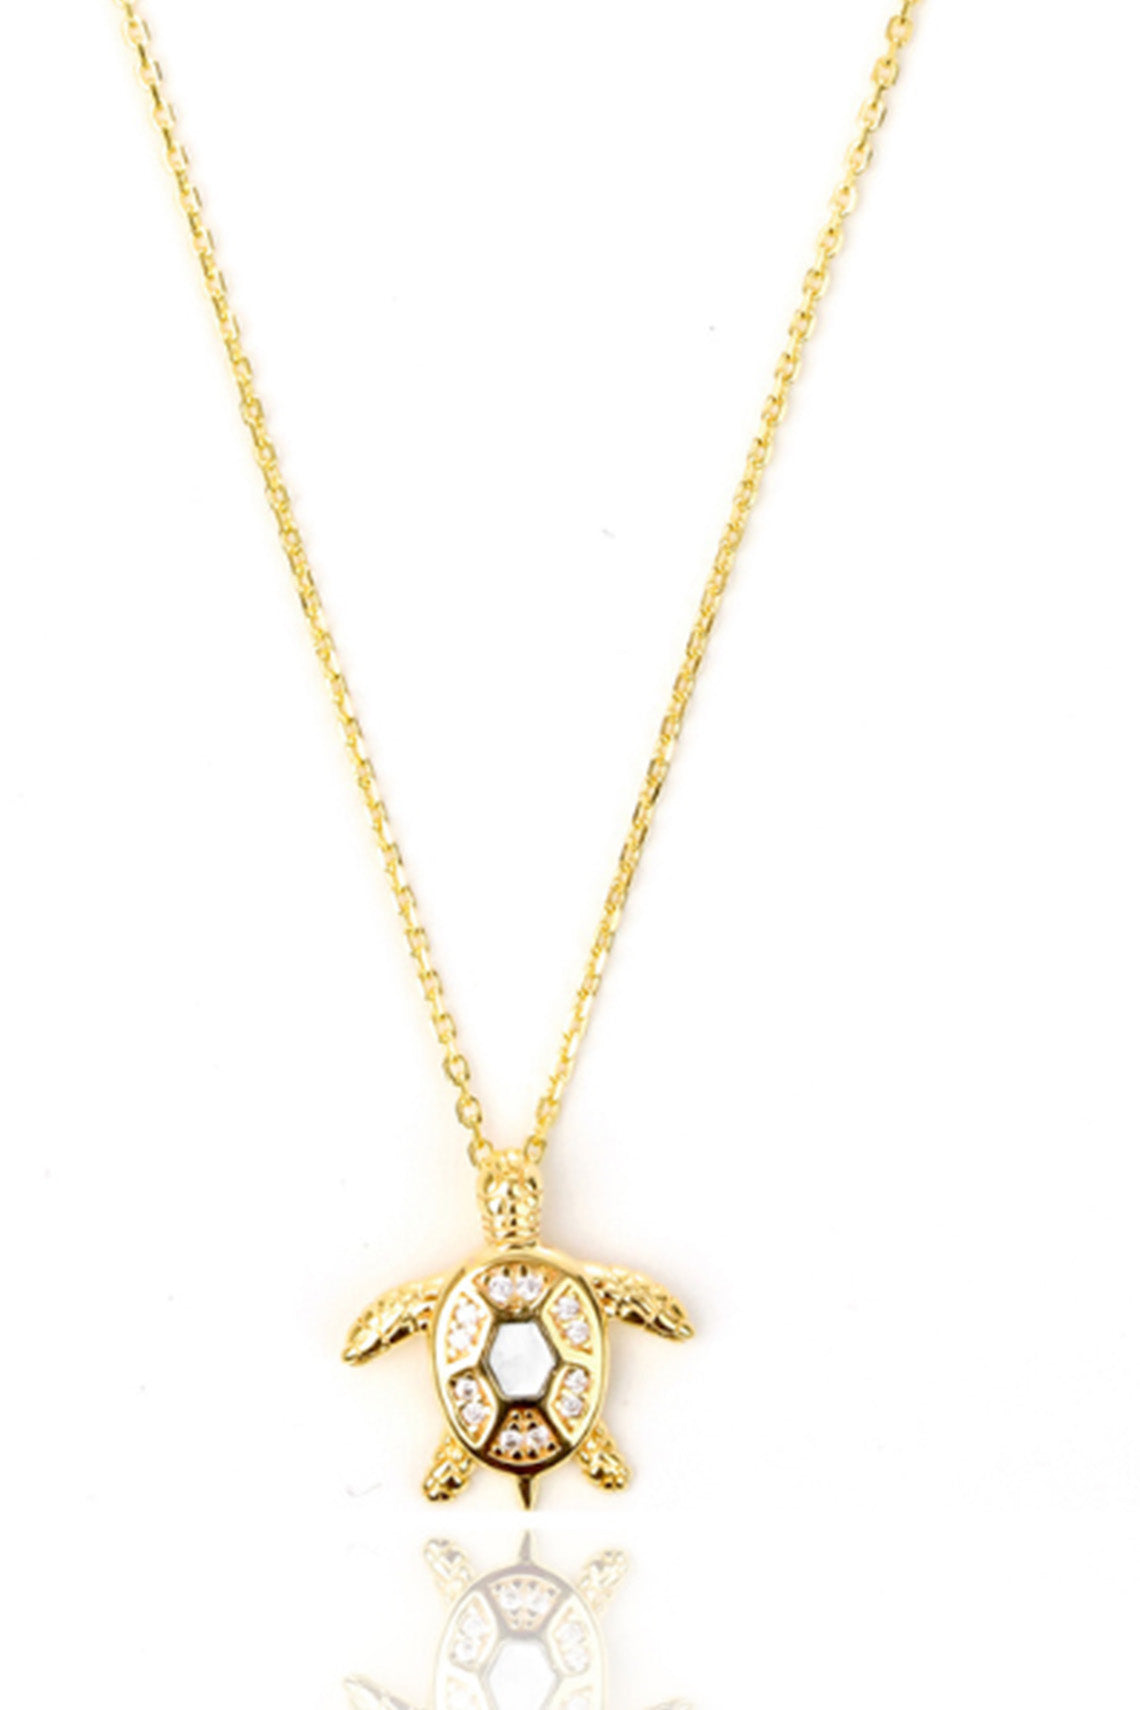 OCEANS SEA TURTLE MOTHER OF PEARL NECKLACE GOLD